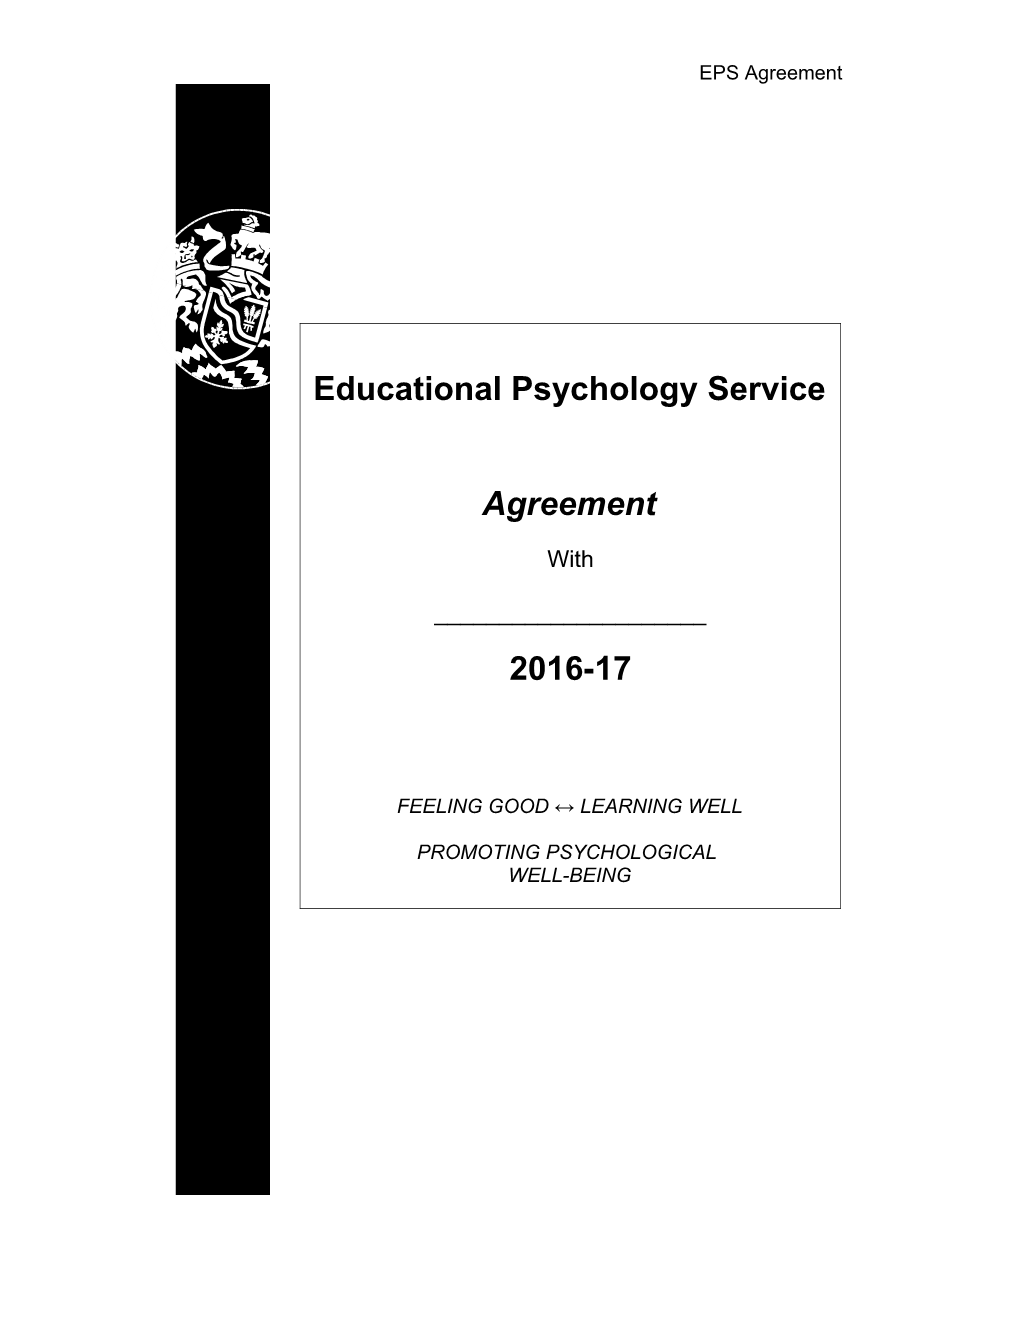 This Partnership Agreement Sets out to Explain and Clarify the Range and Quality of Service